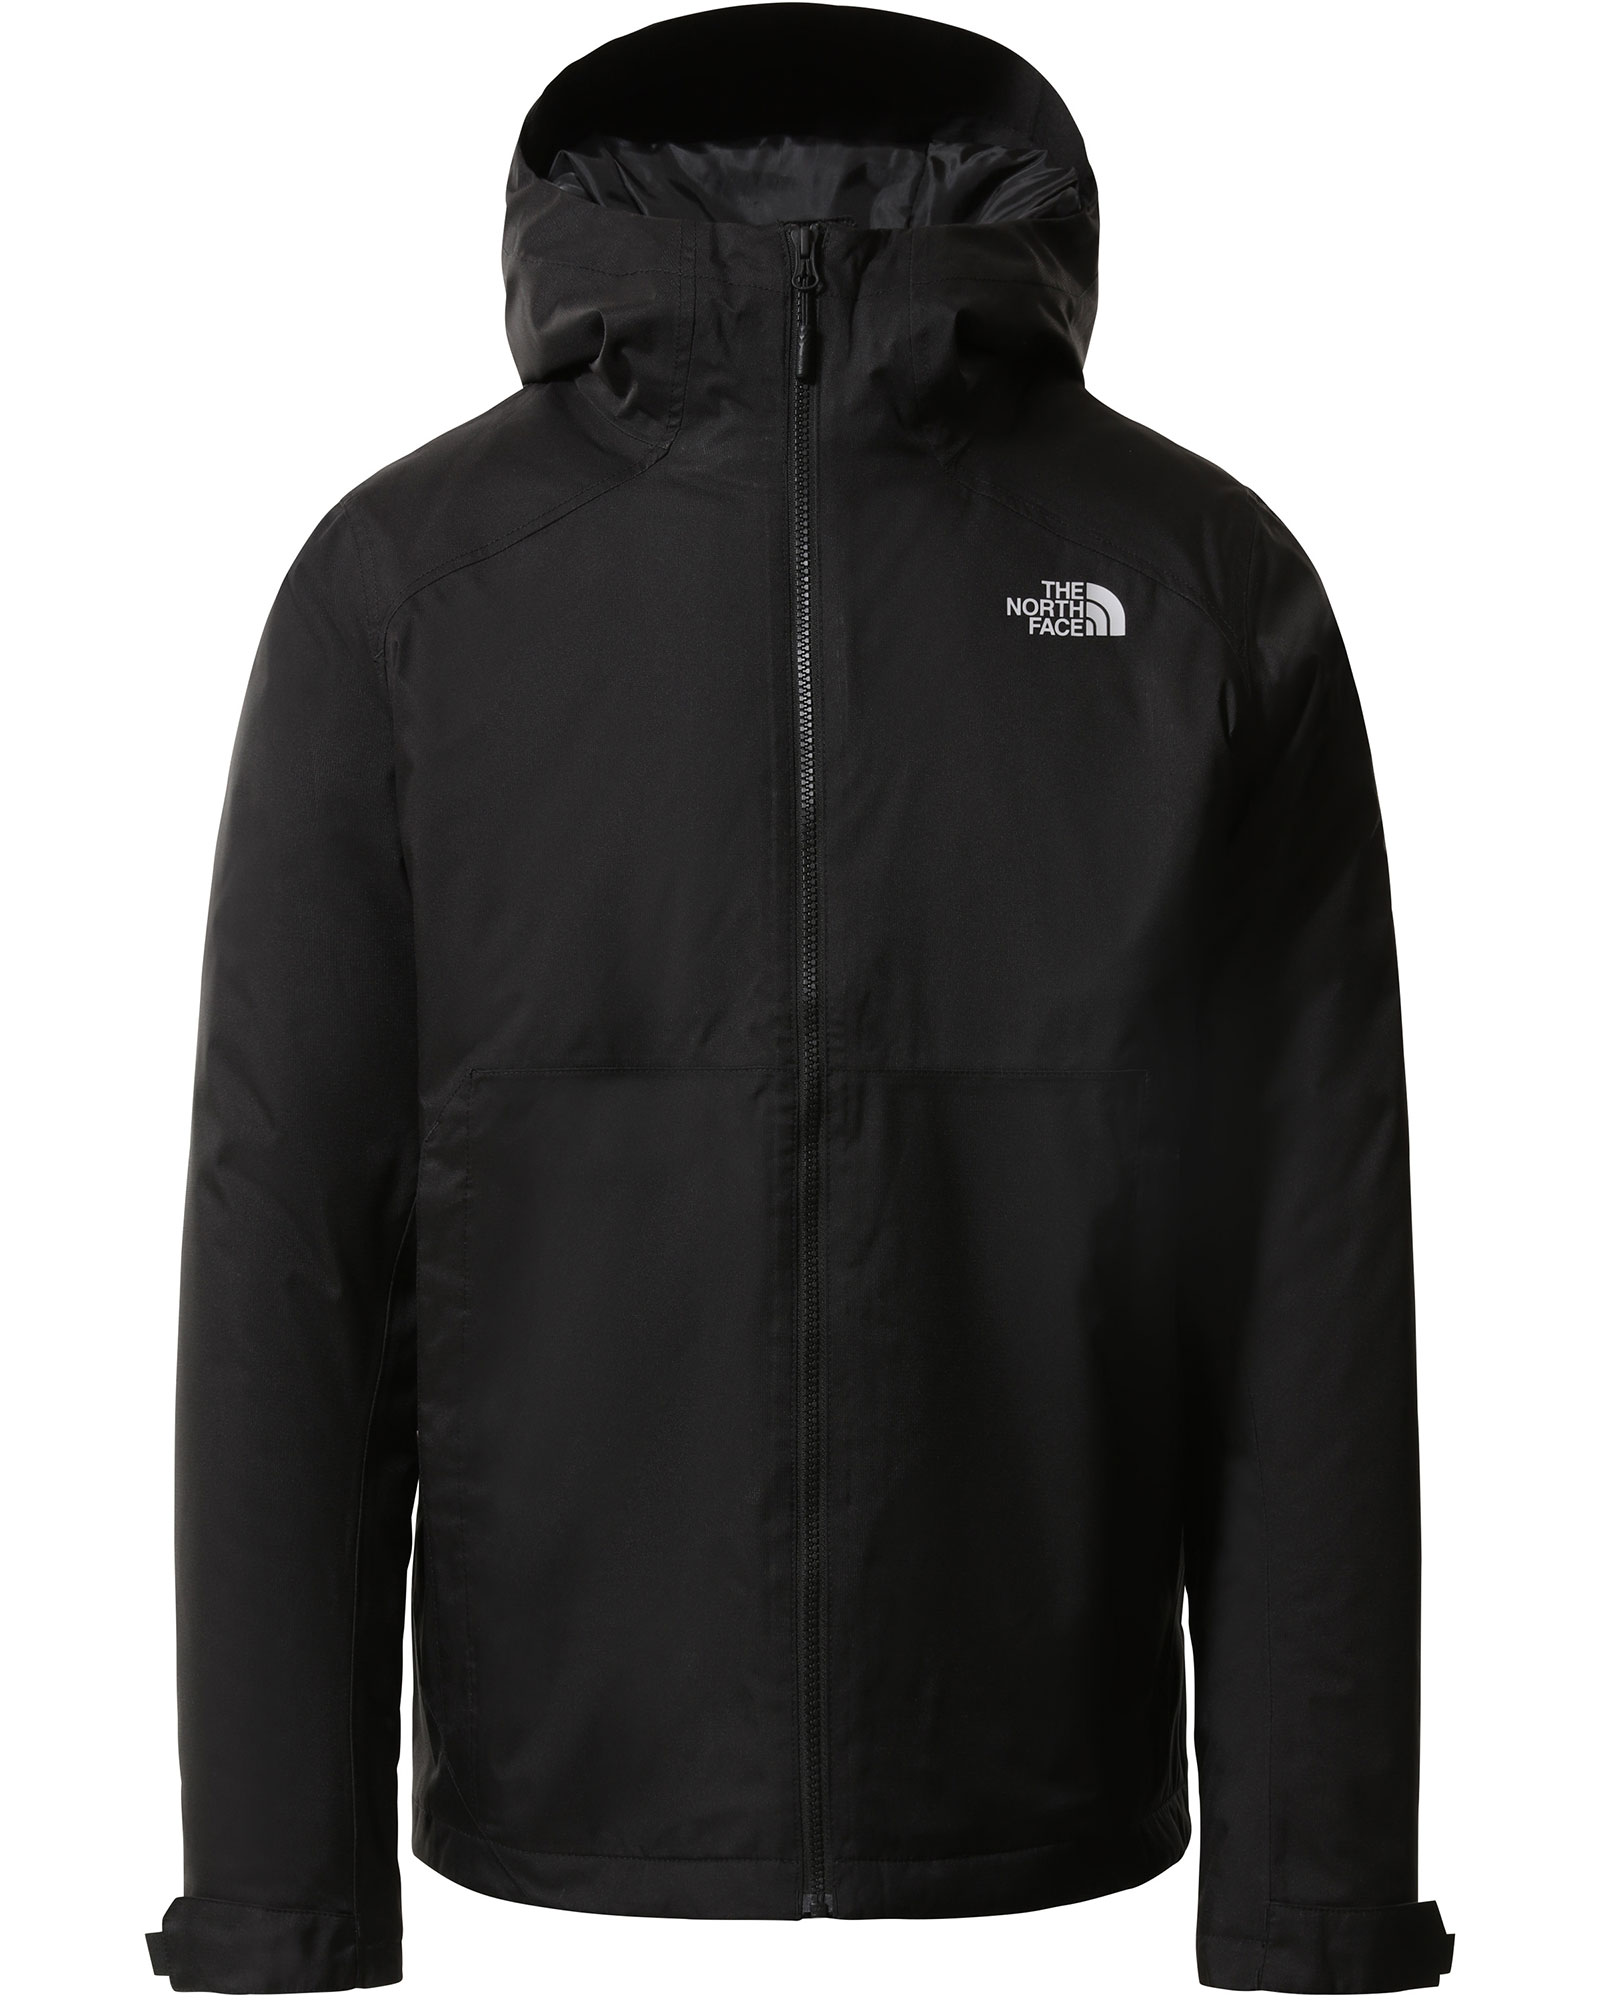 The North Face Millerton DryVent Men’s Insulated Jacket - TNF Black XXL